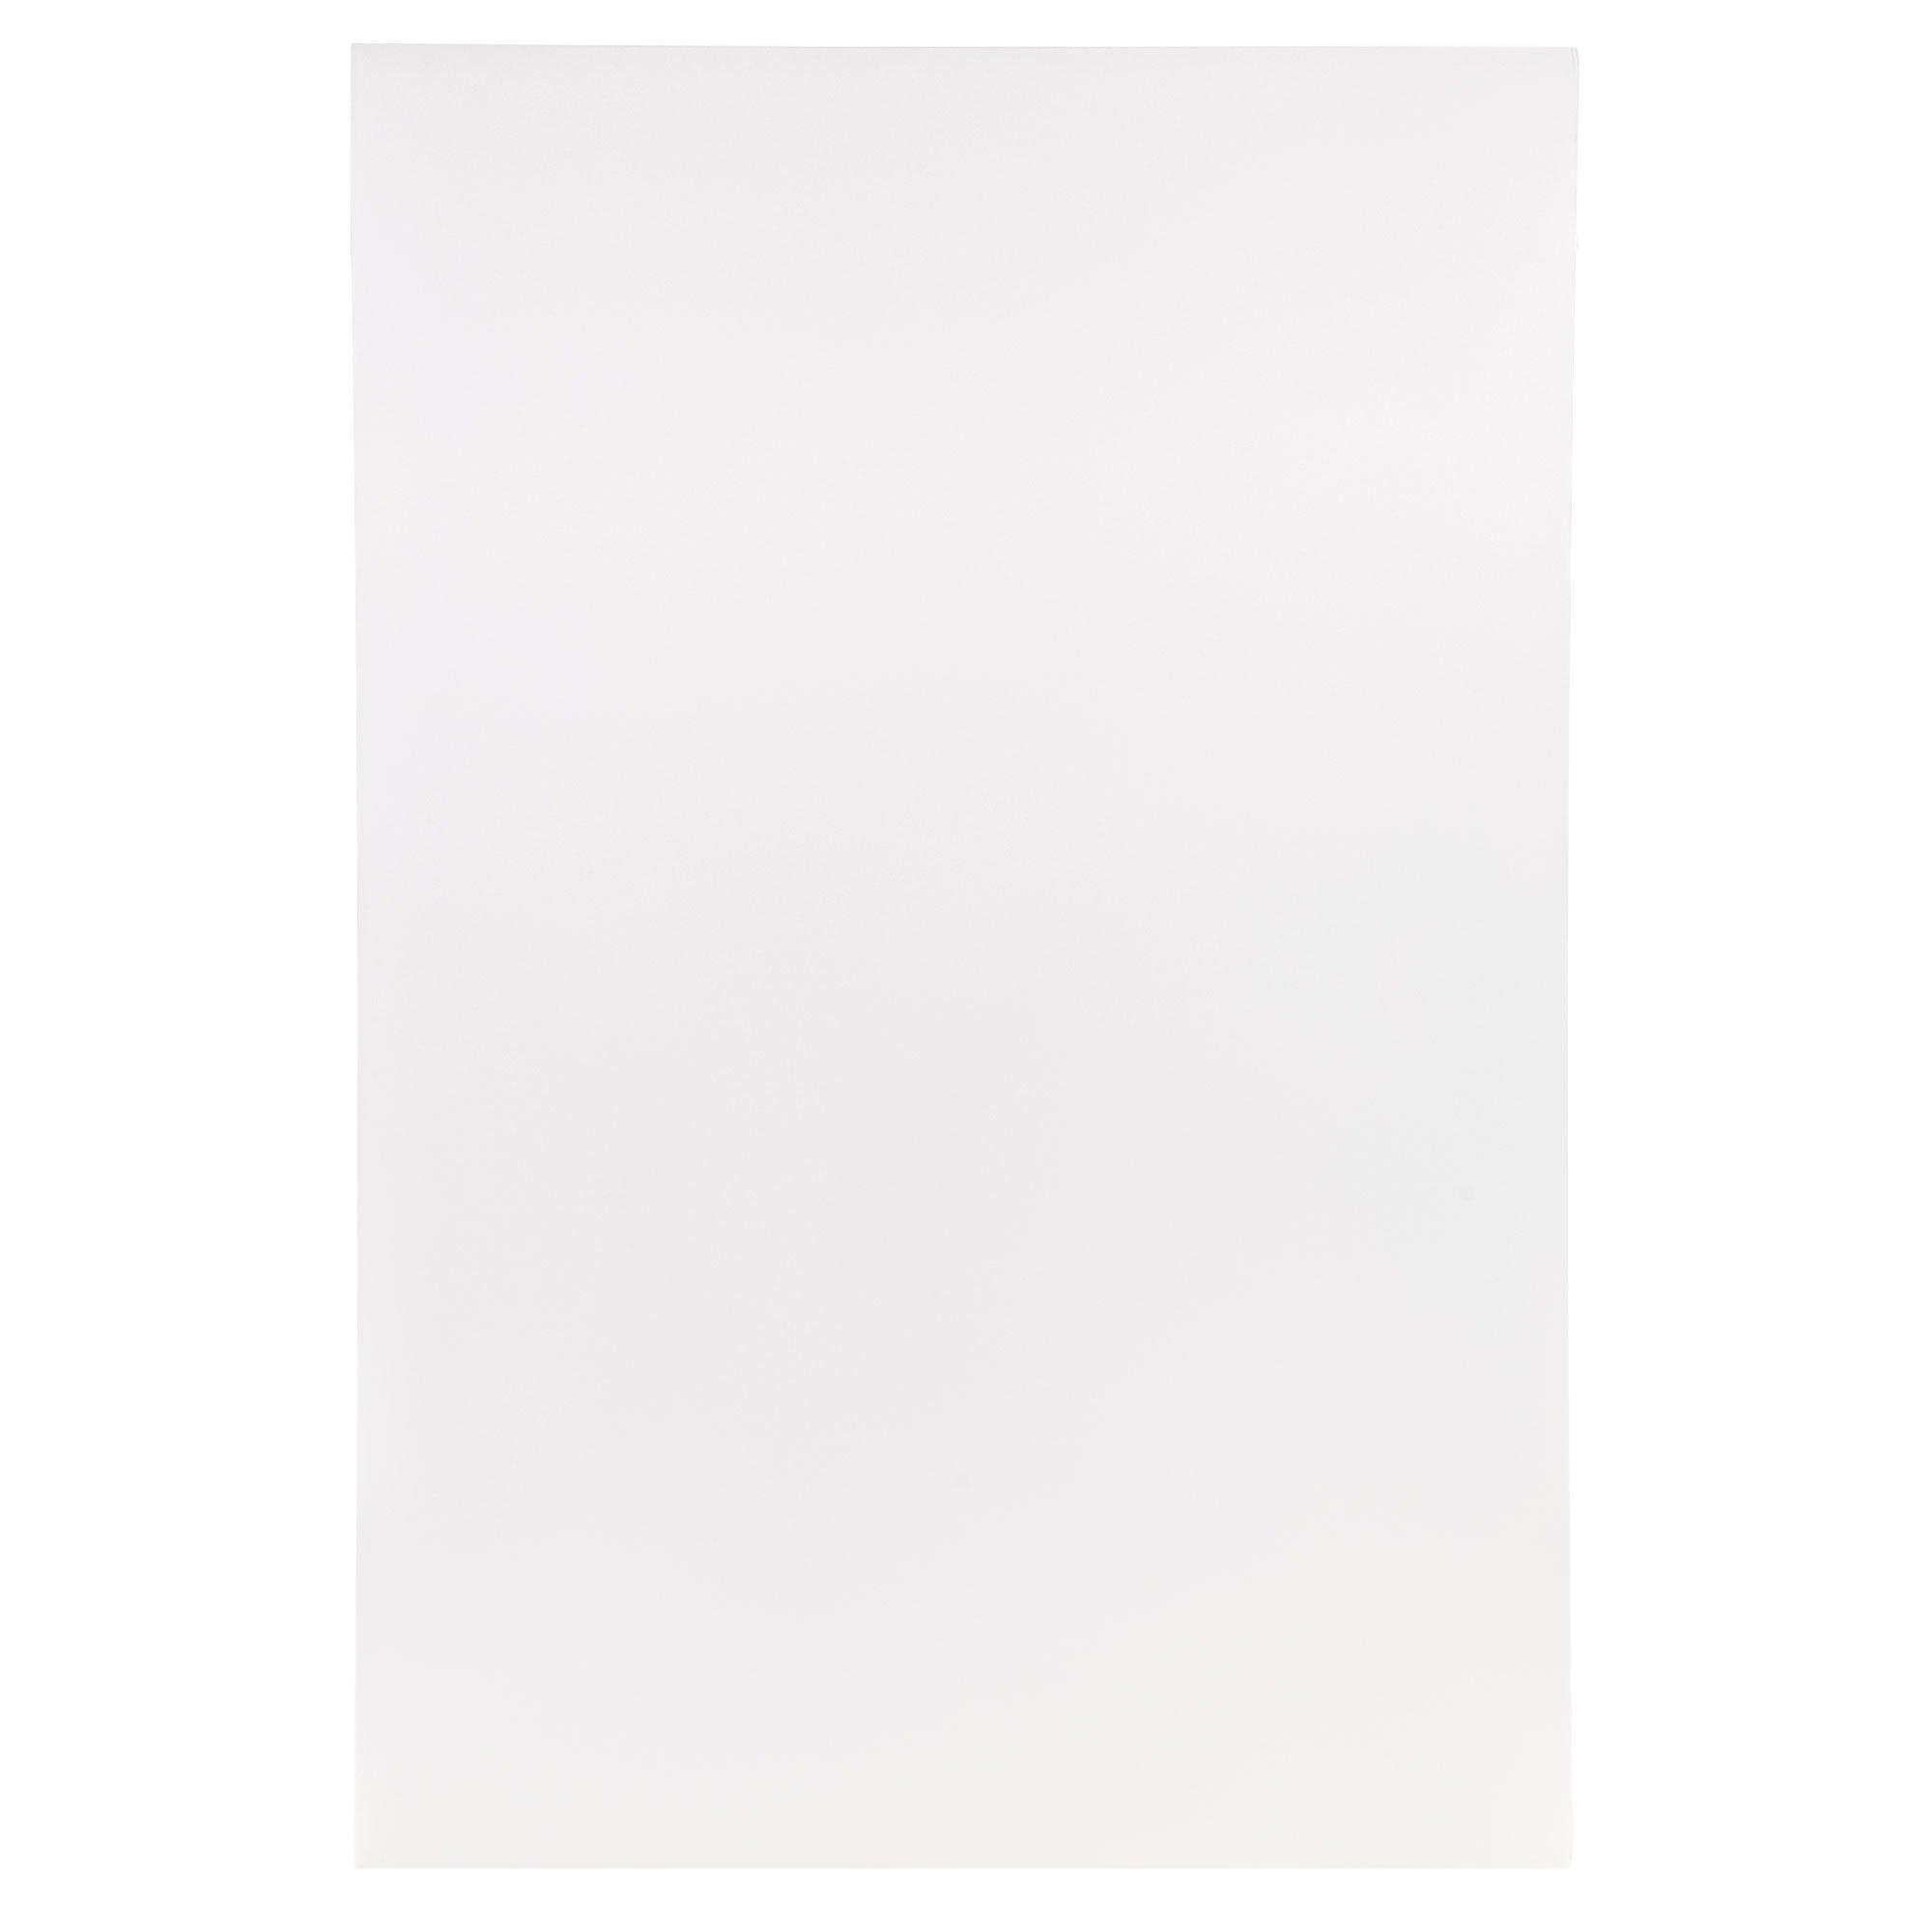 40 x 60” inch Foam Board – White (Pack of 10) – 5 mm thick – Protectafile